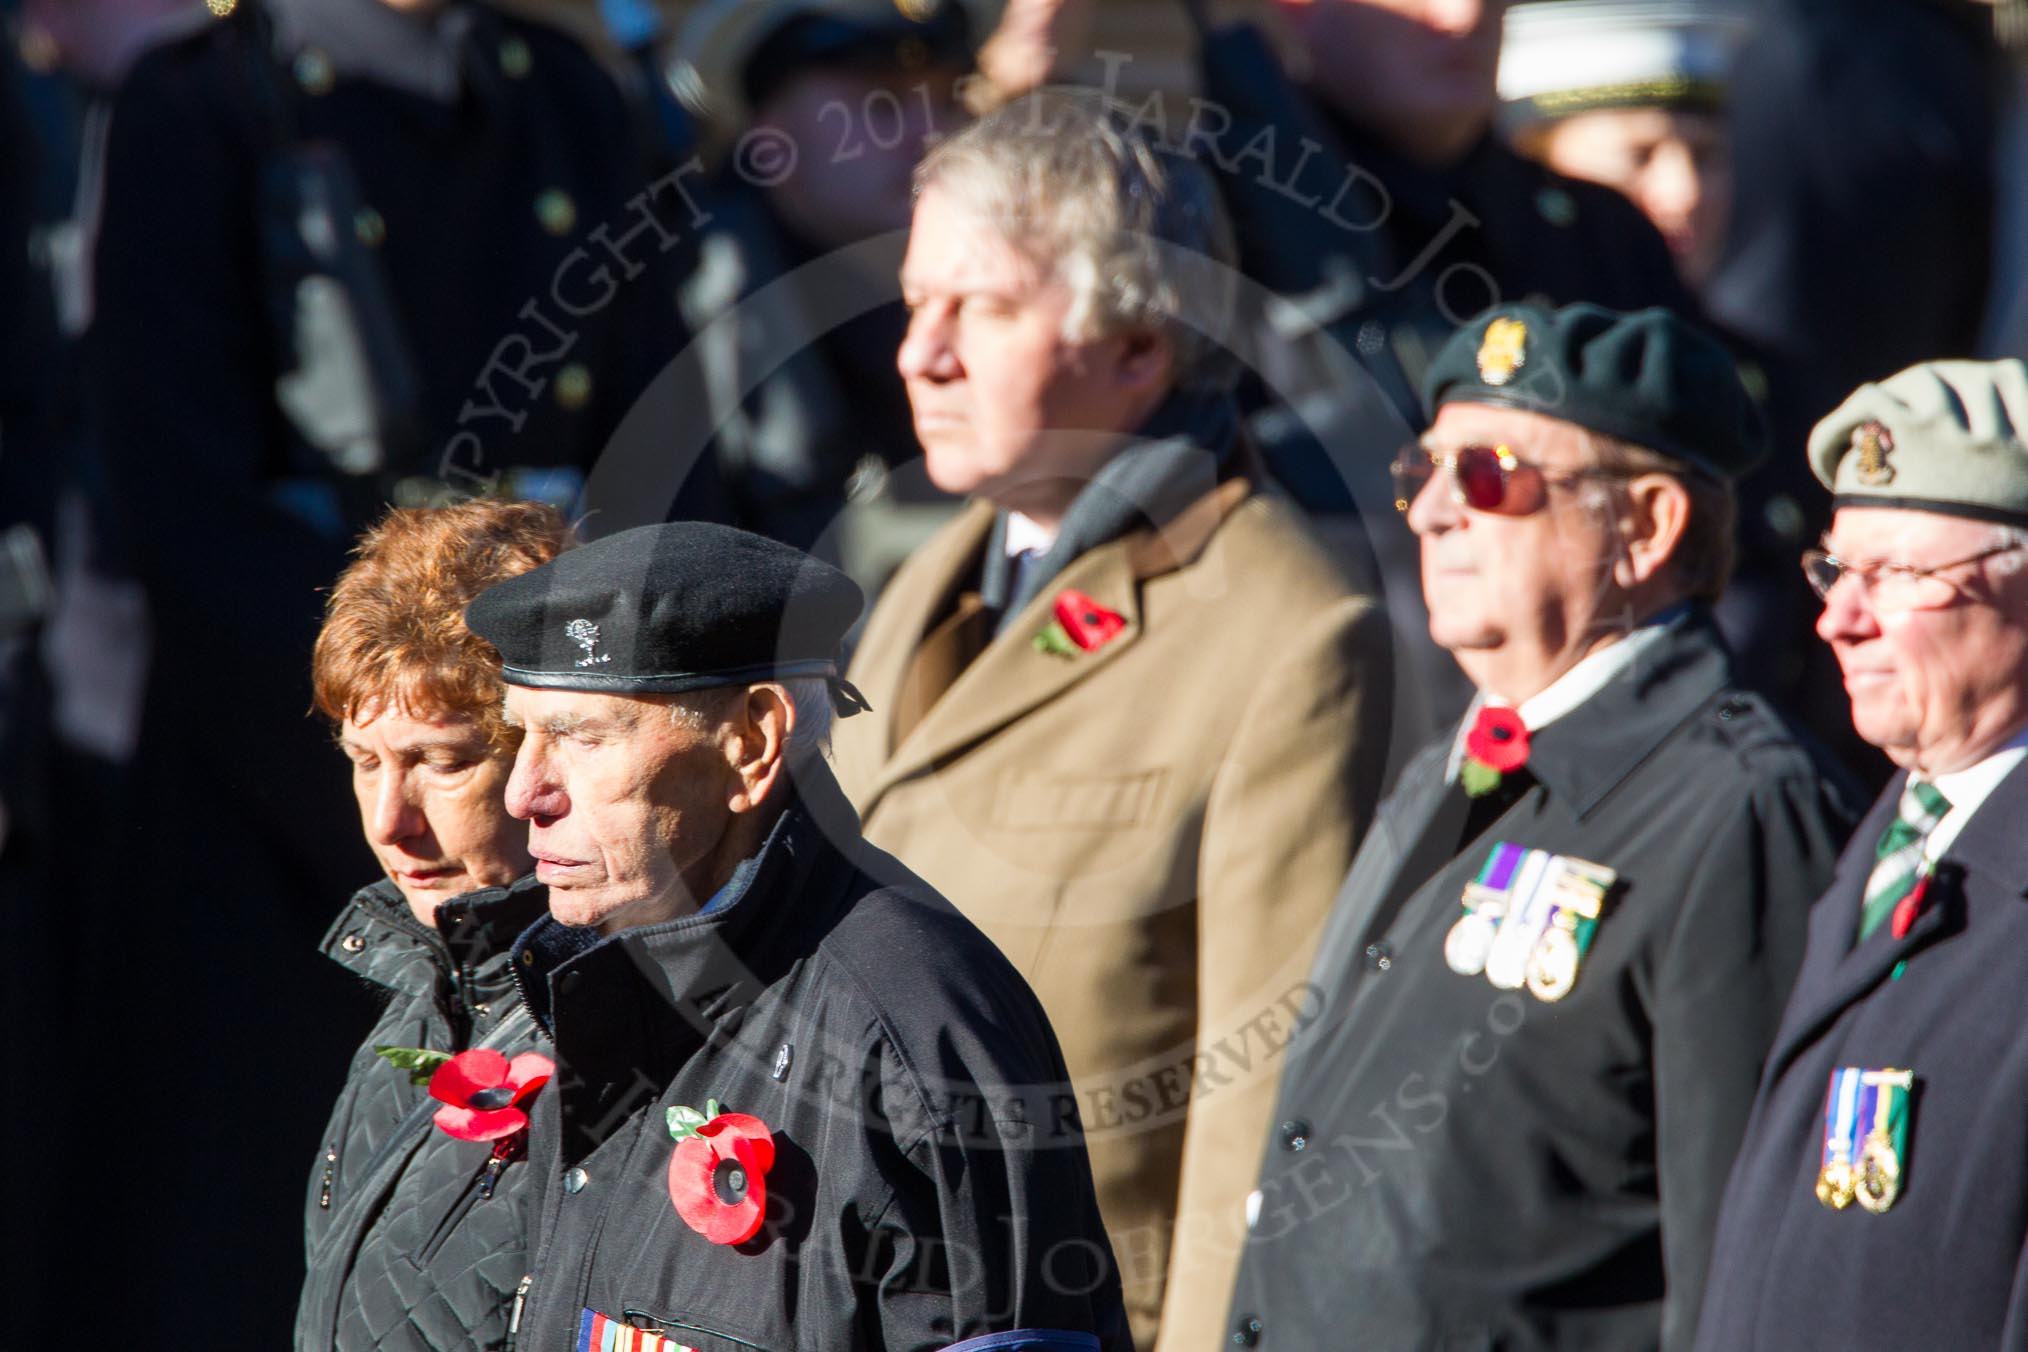 Remembrance Sunday Cenotaph March Past 2013: F20 - Popski's Private Army..
Press stand opposite the Foreign Office building, Whitehall, London SW1,
London,
Greater London,
United Kingdom,
on 10 November 2013 at 11:53, image #954